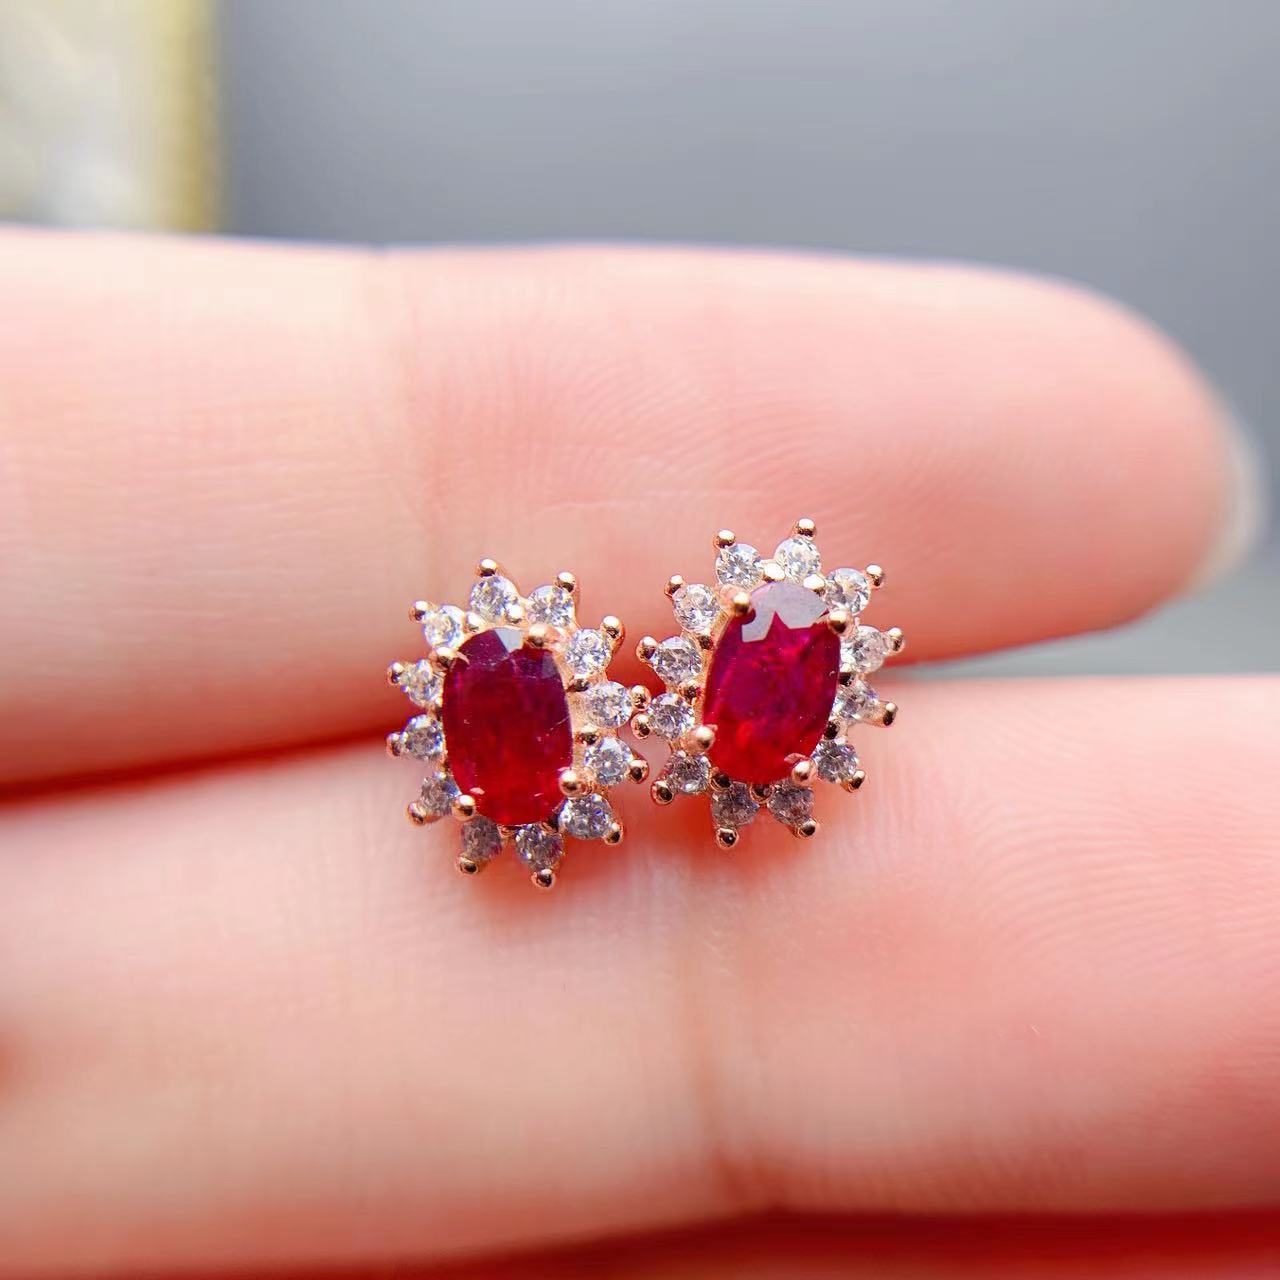 Silver Stud Earrings with Ruby on display